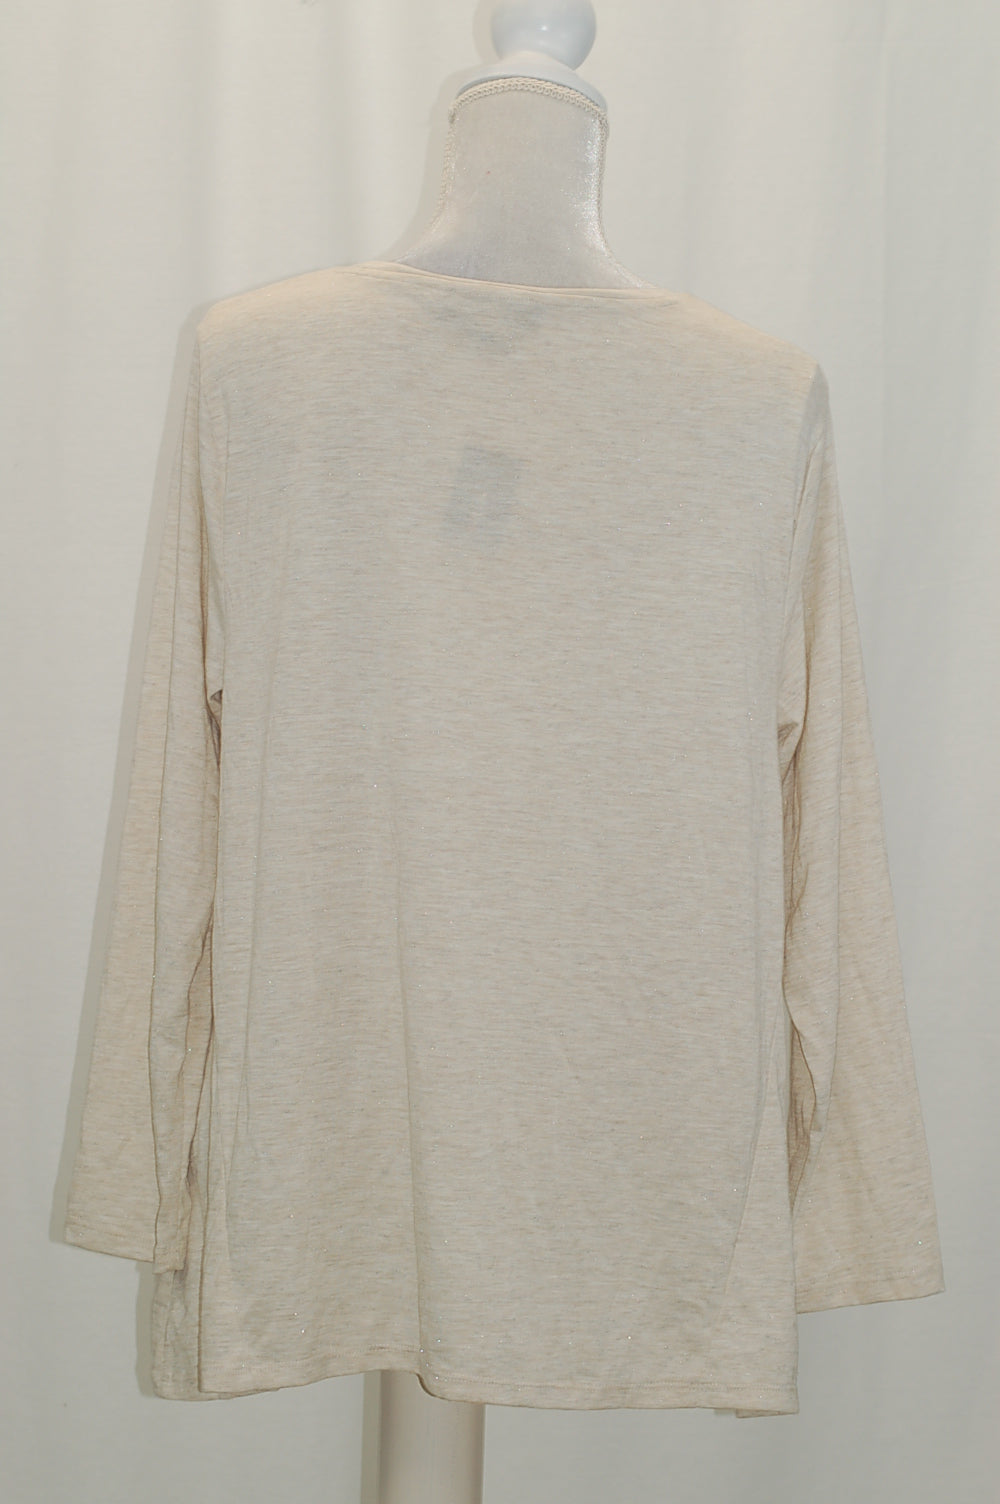 Style Co Petite Sparkle Swing Top Warm Ivory PXS